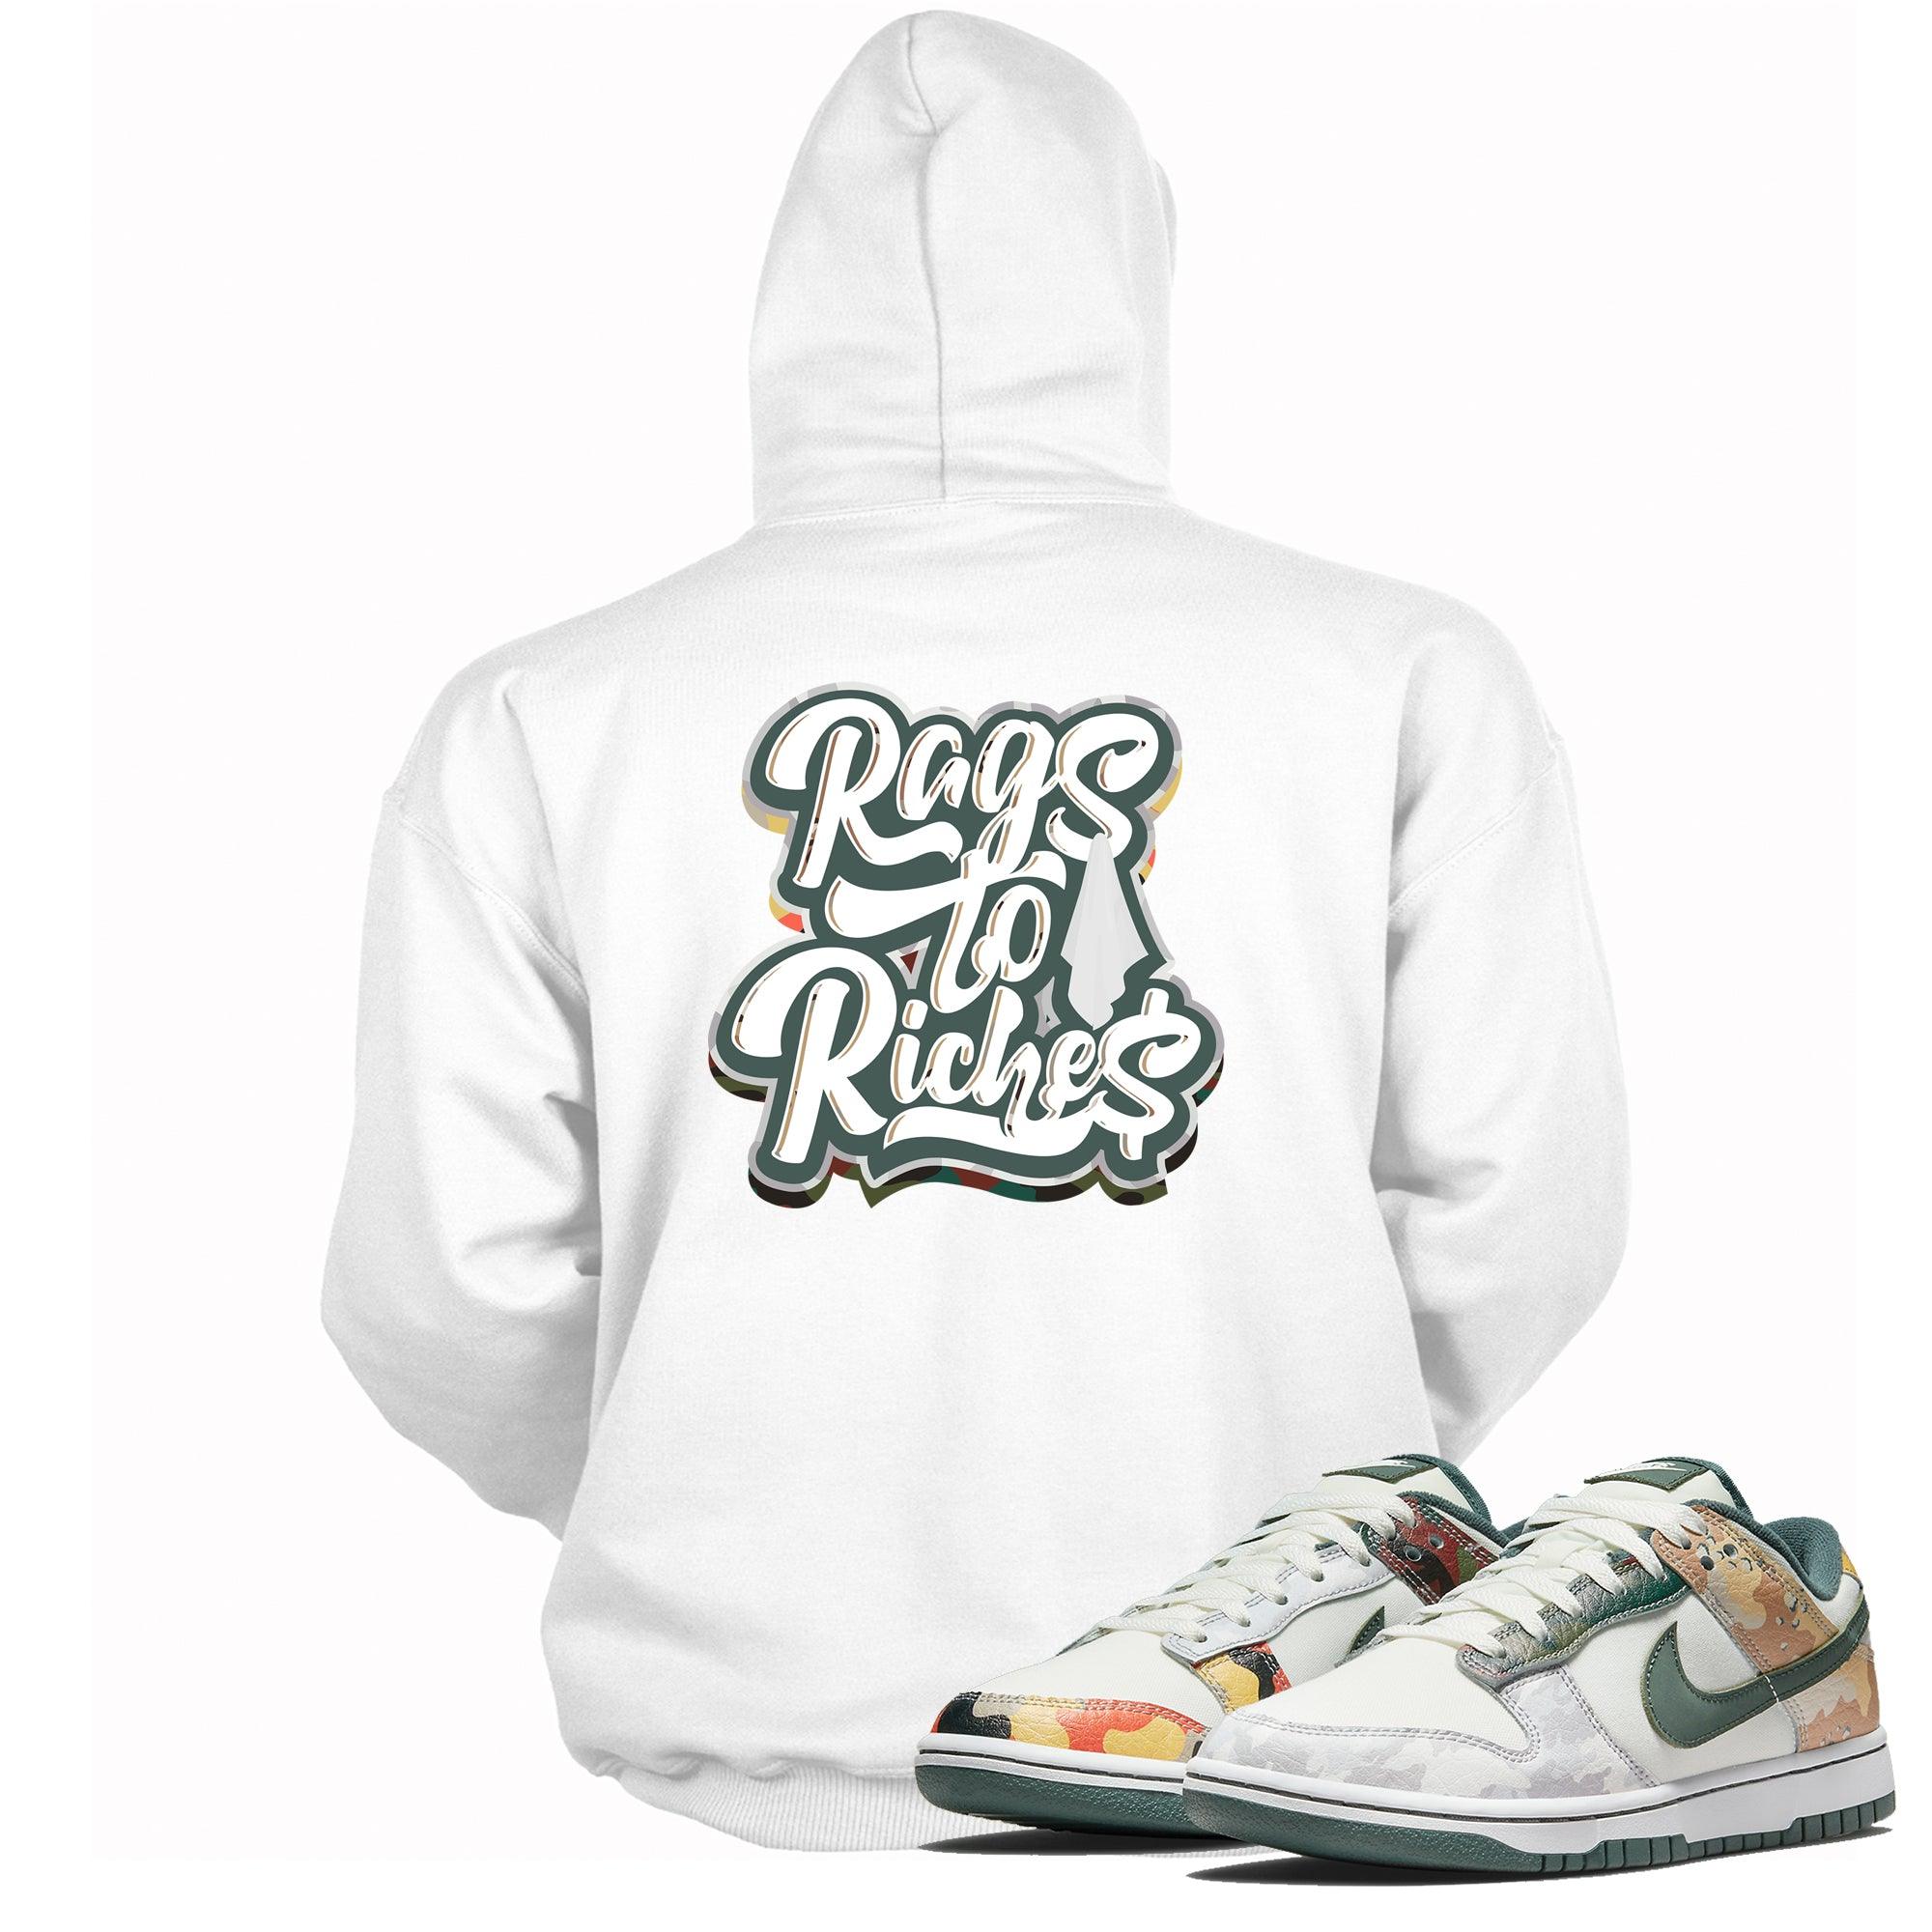 Rags To Riches Hoodie Nike Dunk Low Sail Multi Camo photo